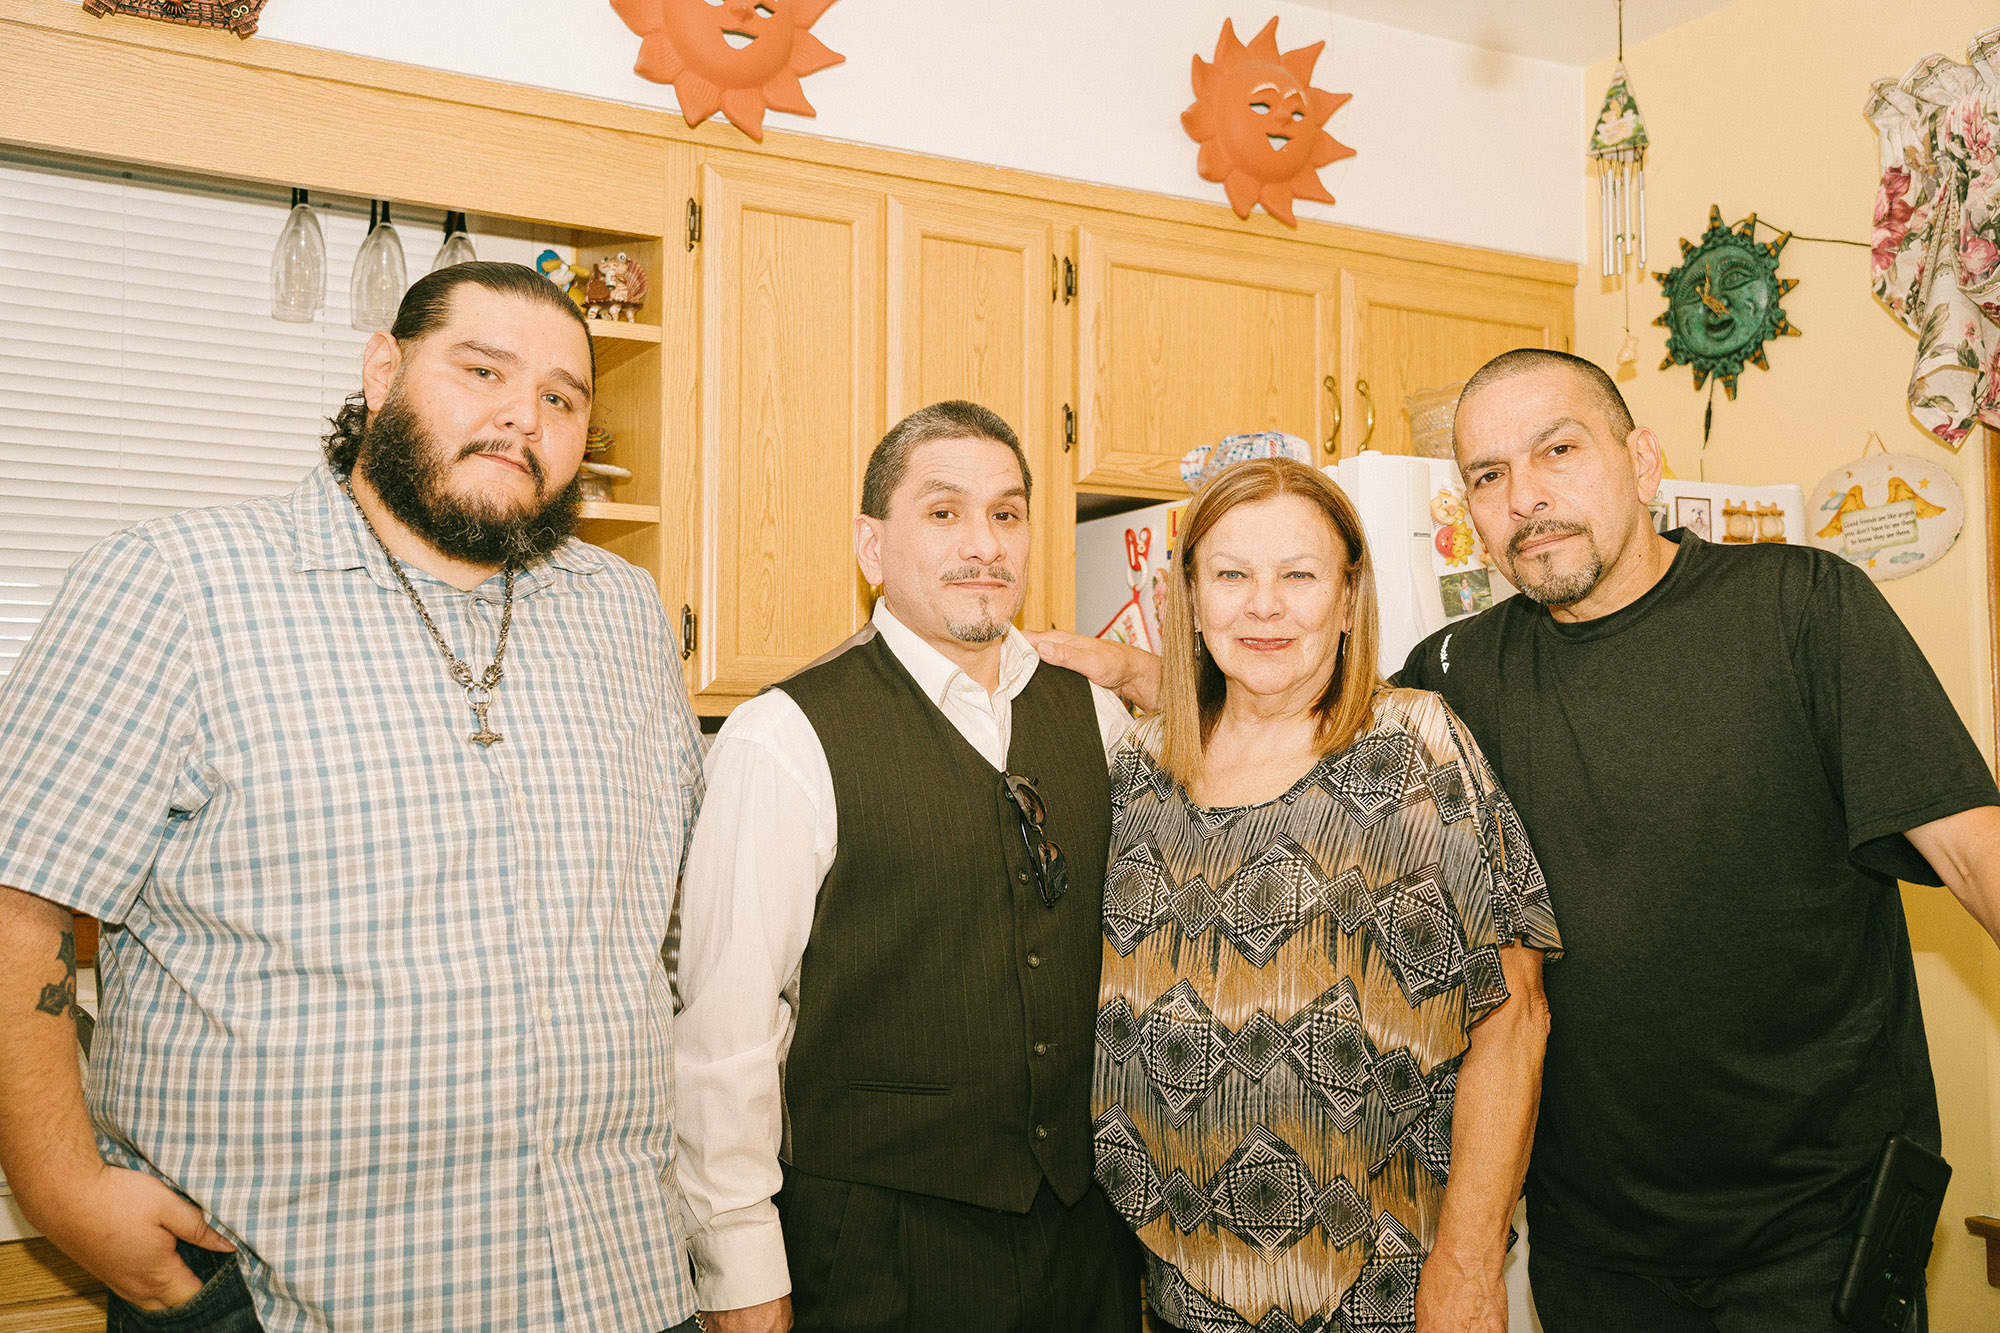 John Galvan at home with his family before his exoneration hearing on July 21, 2022, in Illinois. (Image: Ray Abercrombie/Innocence Project)